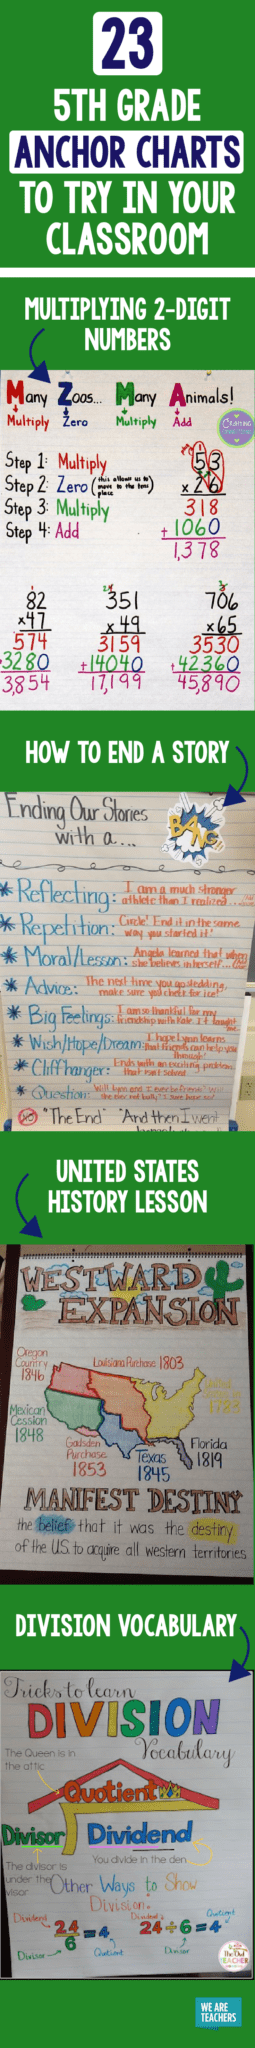 23 5th grade anchor charts to try in your classroom